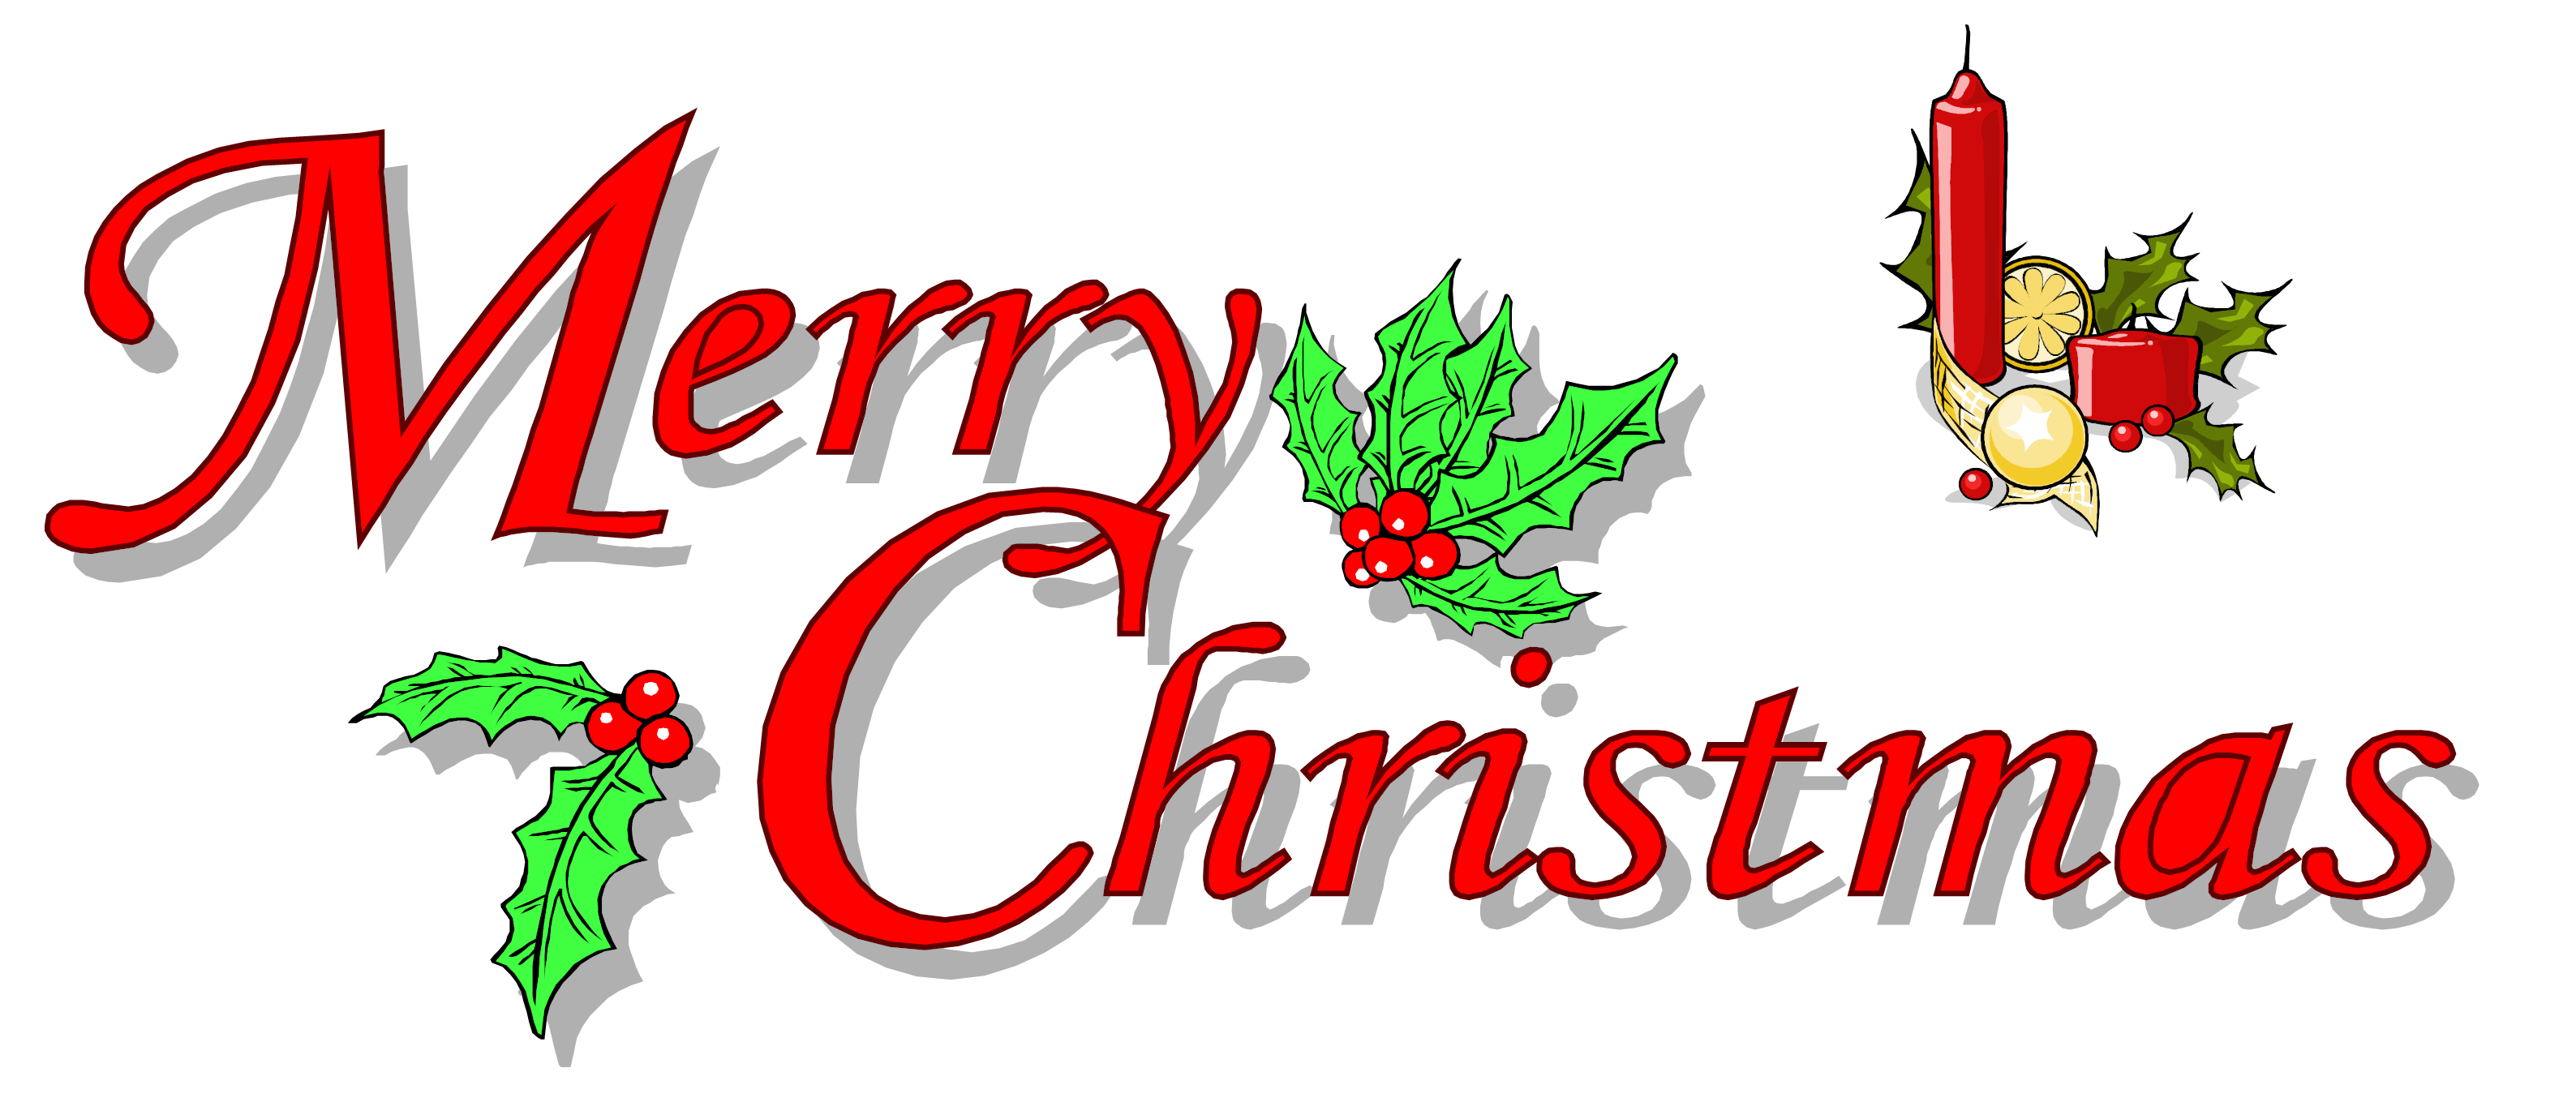 christmas clipart words - photo #11